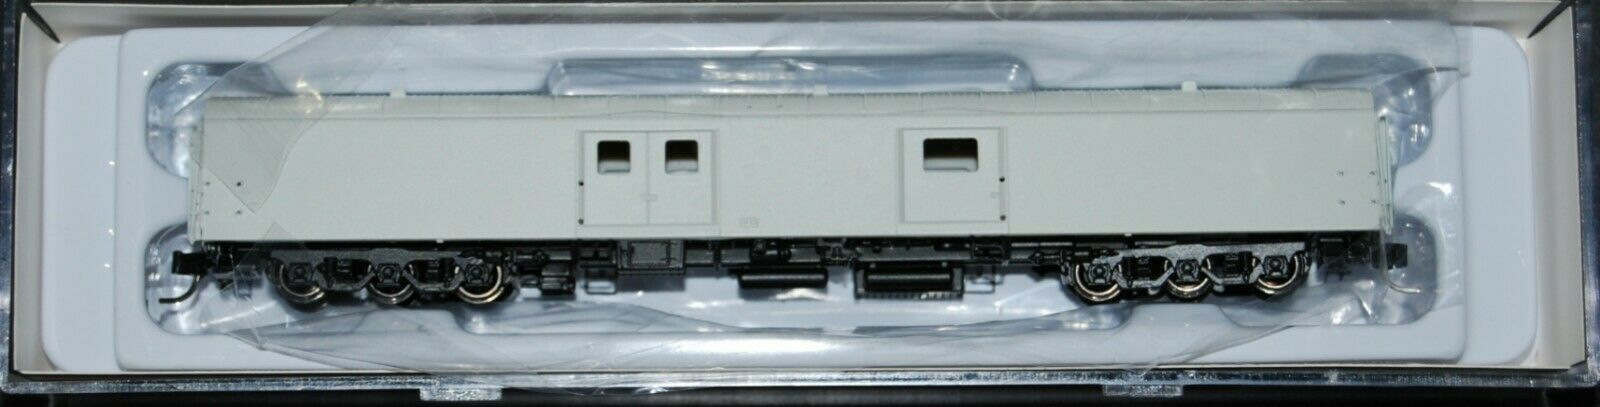 Rapido #506061-n Scale Express Baggage Car -undecorated W/6 Wheel Trucks  New